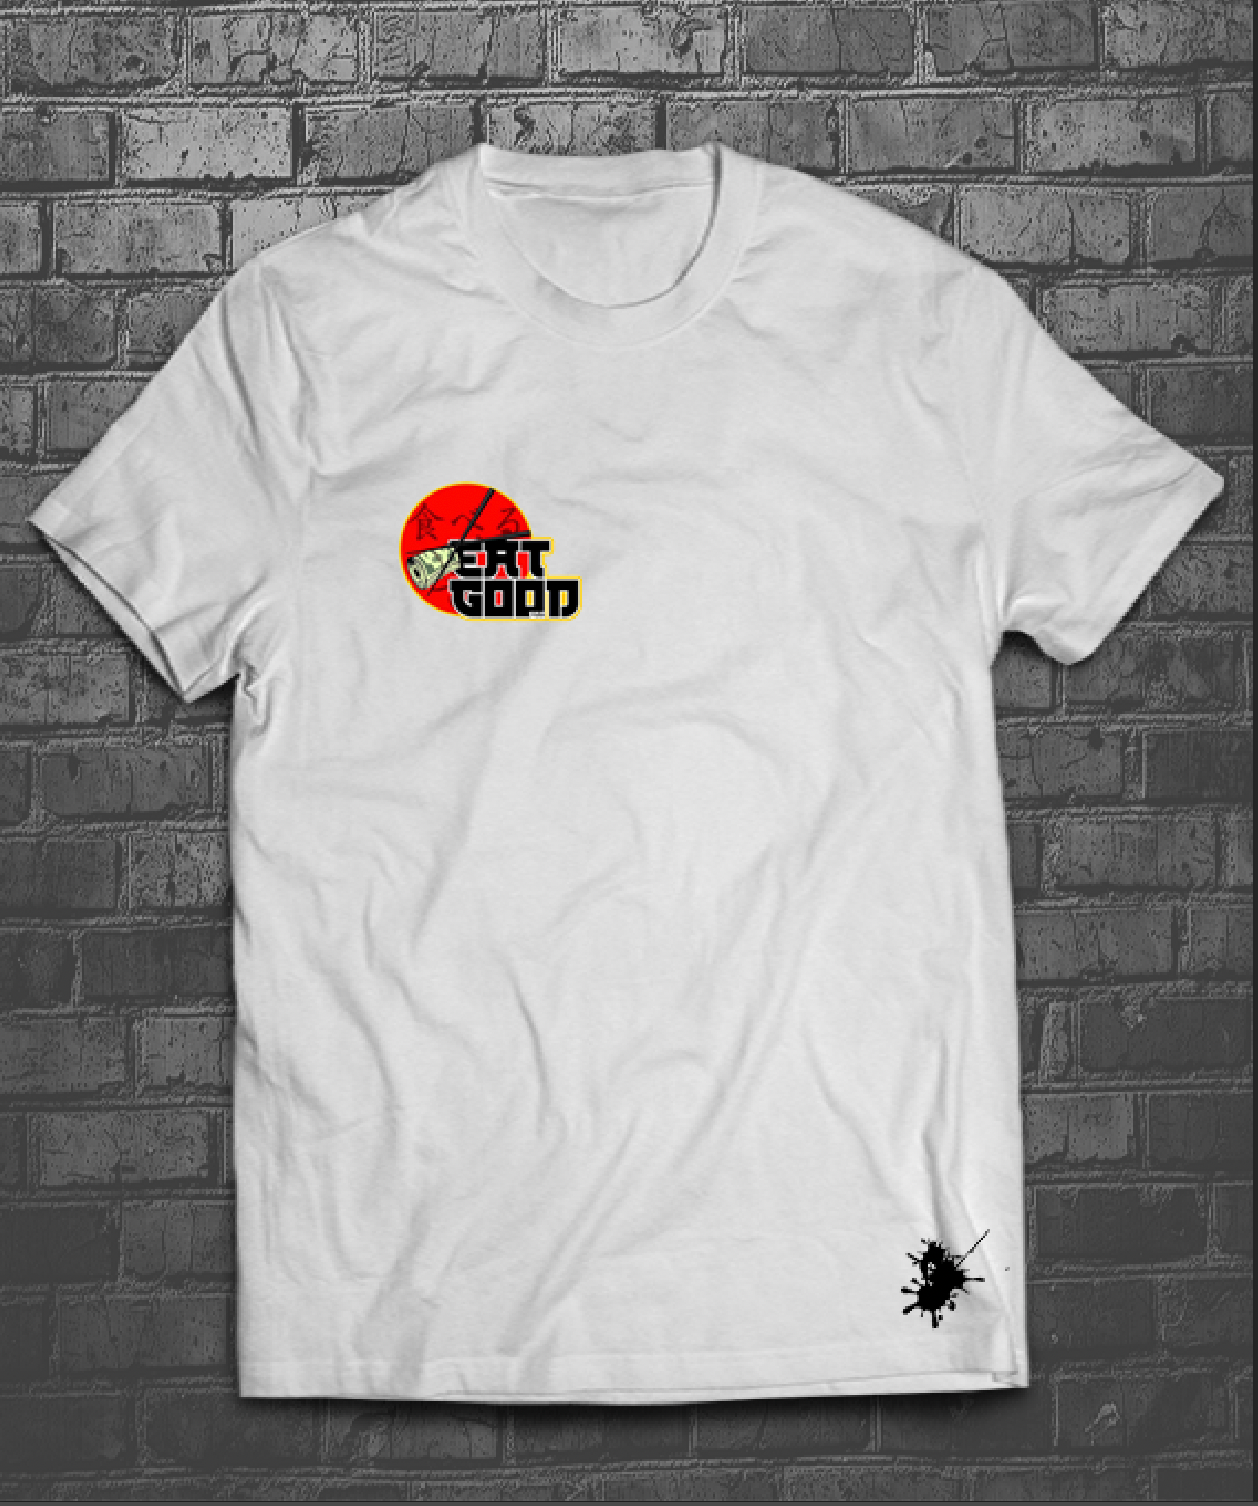 Copy of Eat Good Ent. T-shirt with little logo